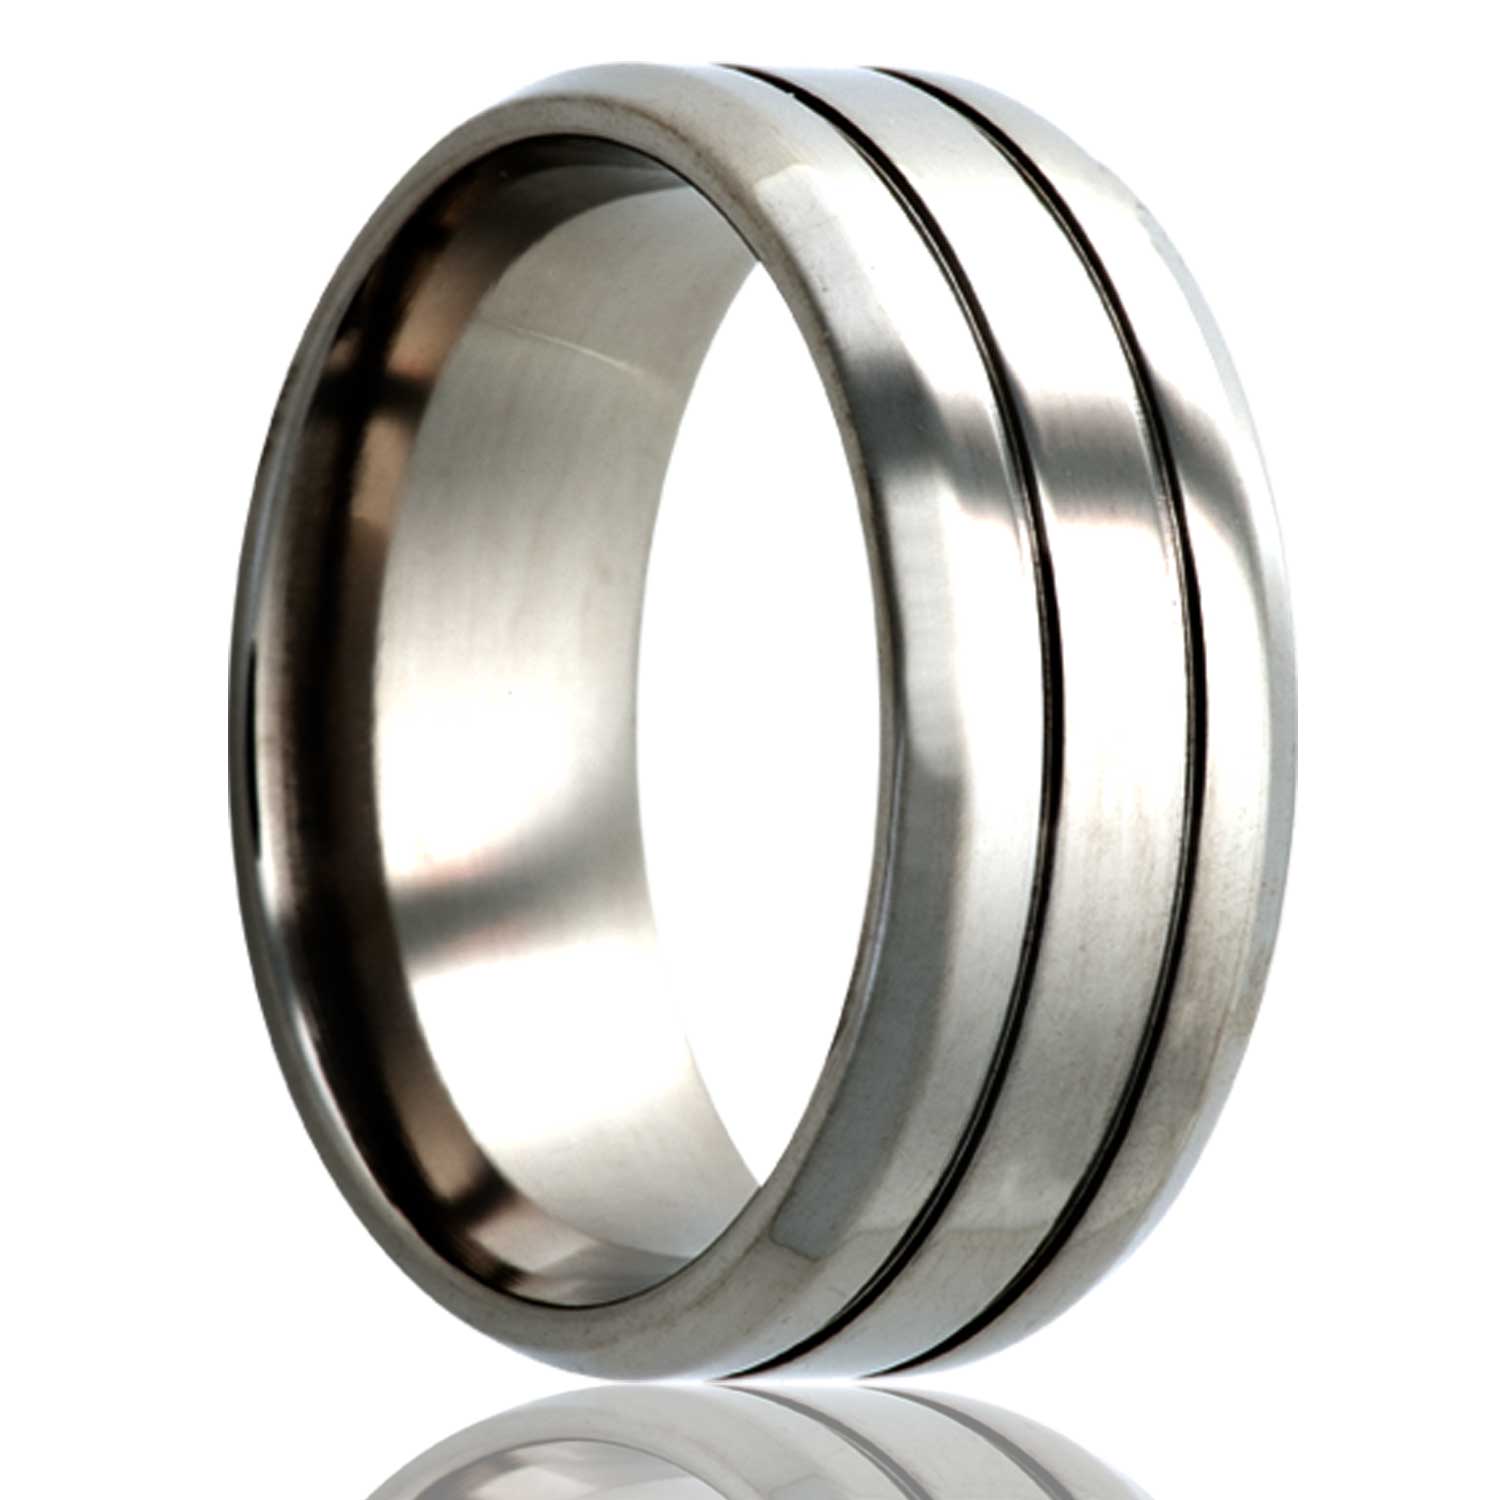 A grooved titanium wedding band with beveled edges displayed on a neutral white background.